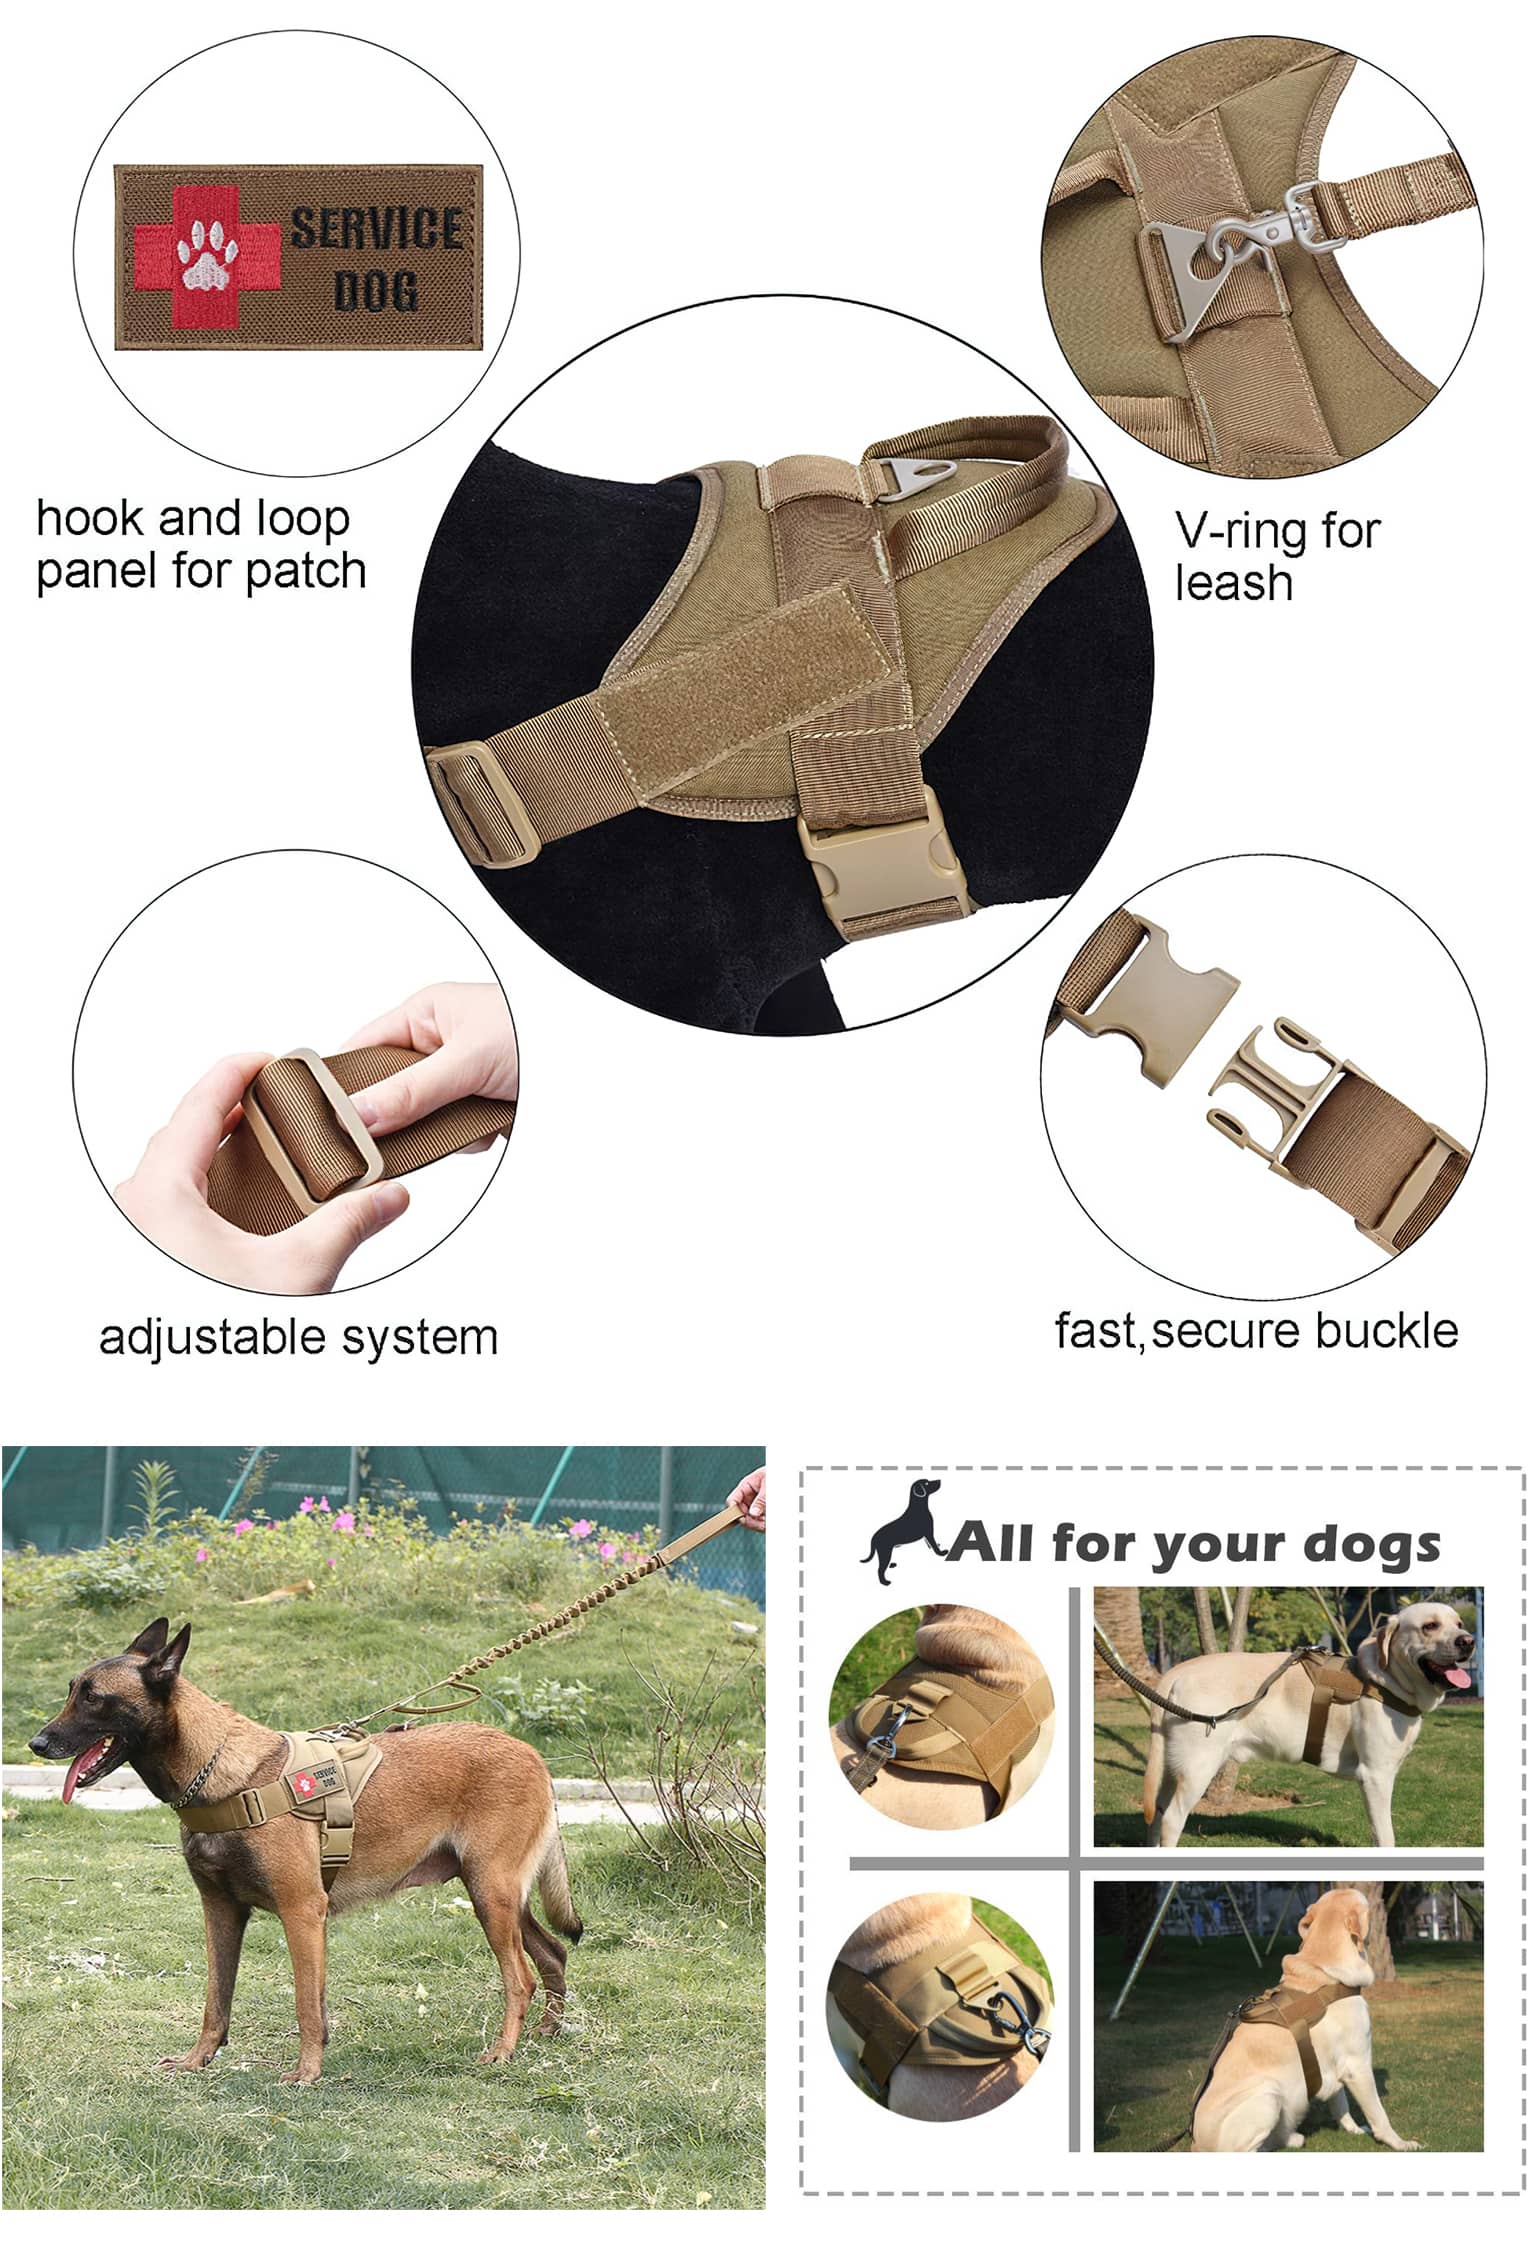 6 Practical Uses For A Tactical Dog Harness - K9sOverCoffee